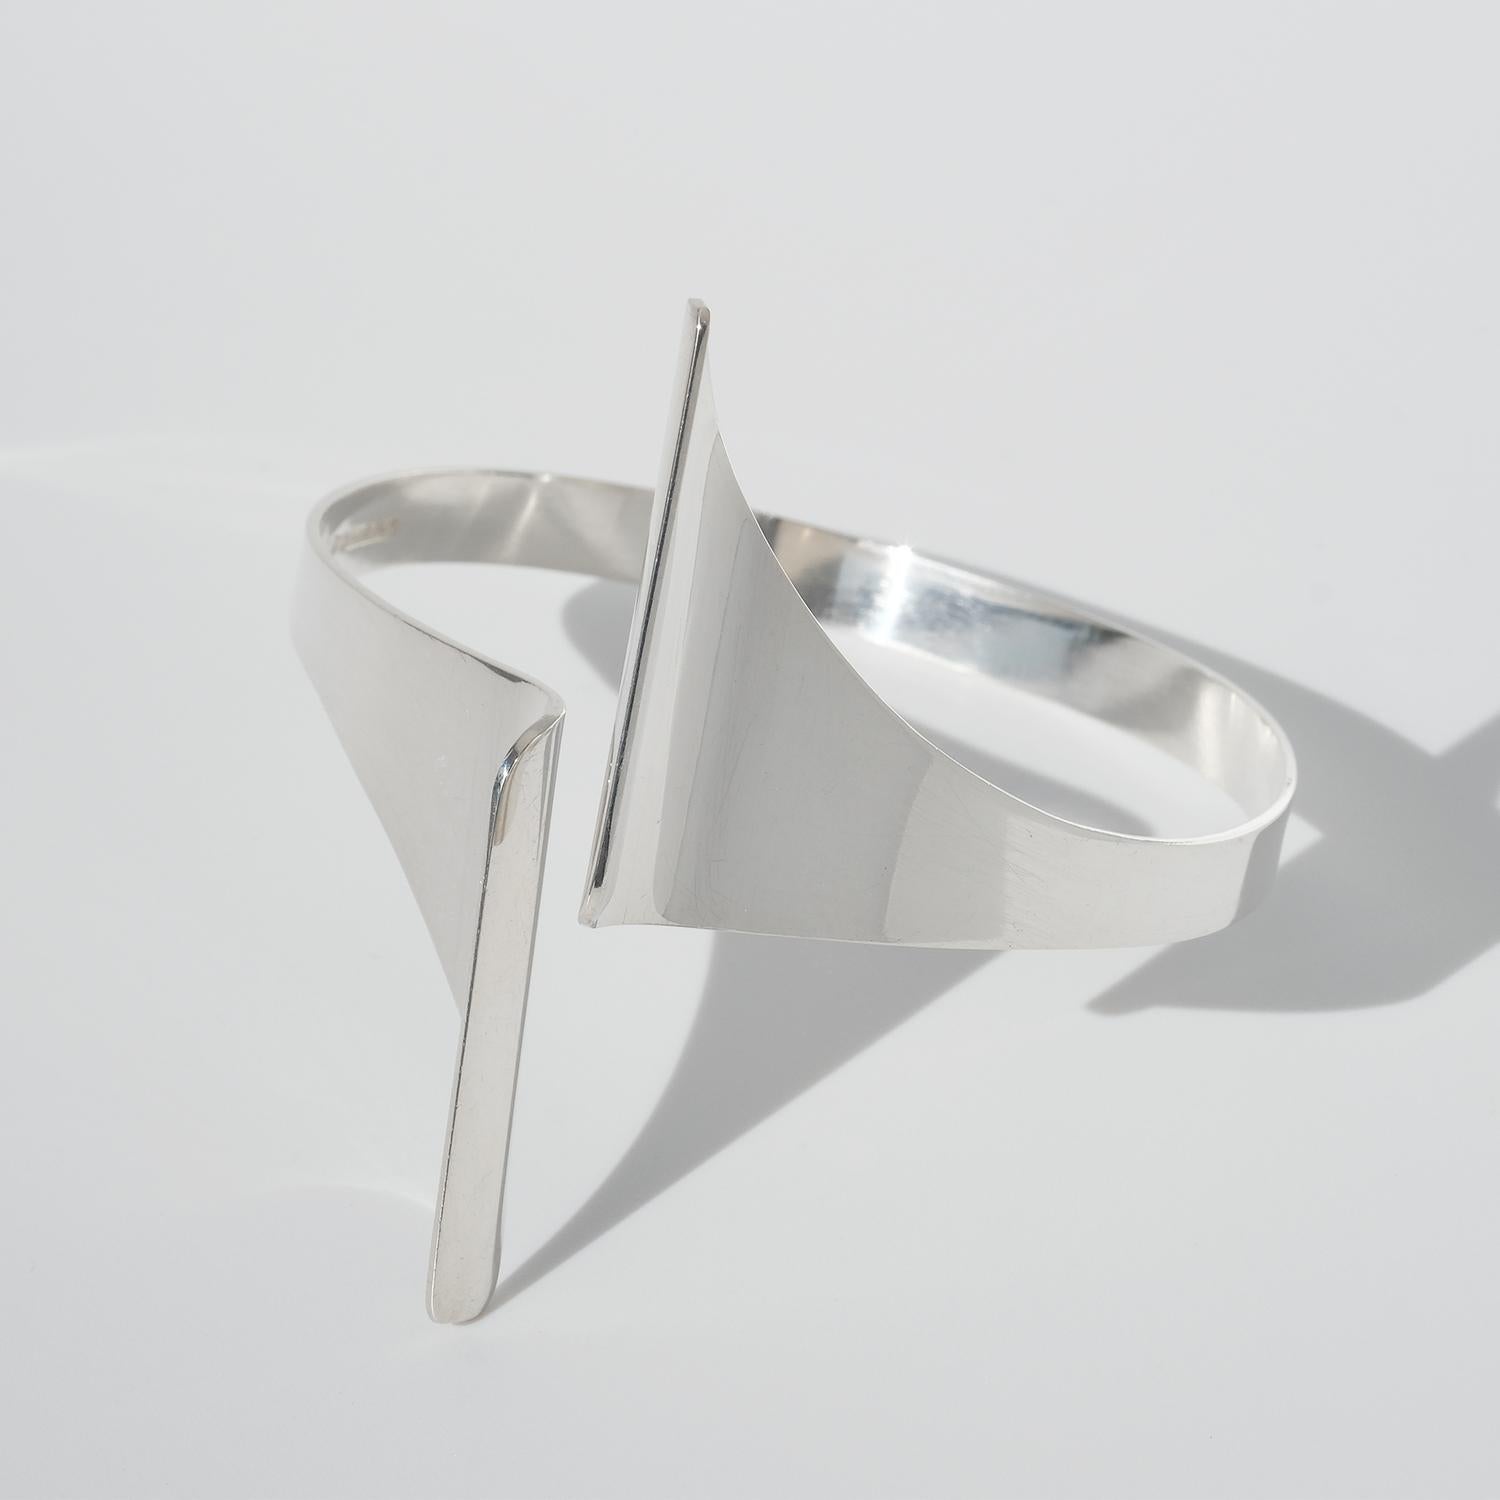 This sterling silver cuff bracelet is fixed and has an assymetric shape.

The bracelet has a classic as well as a timeless look and it will fit perfectly for the business meeting as well as the rave party.

Did you know that Pekka Piekäinen designed